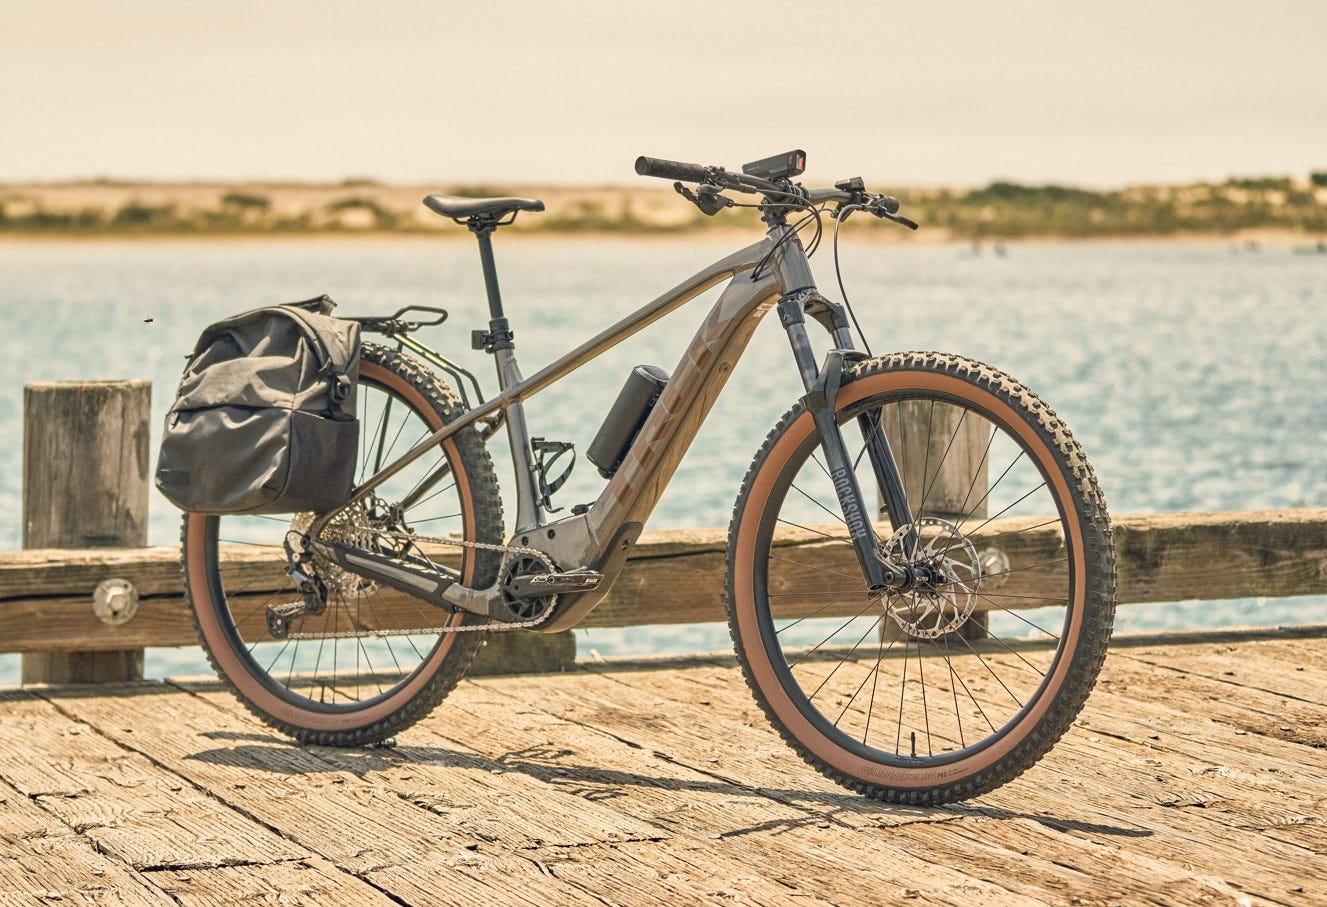 Best-selling Trek Marlin is now an electric bike too | Cycling Electric